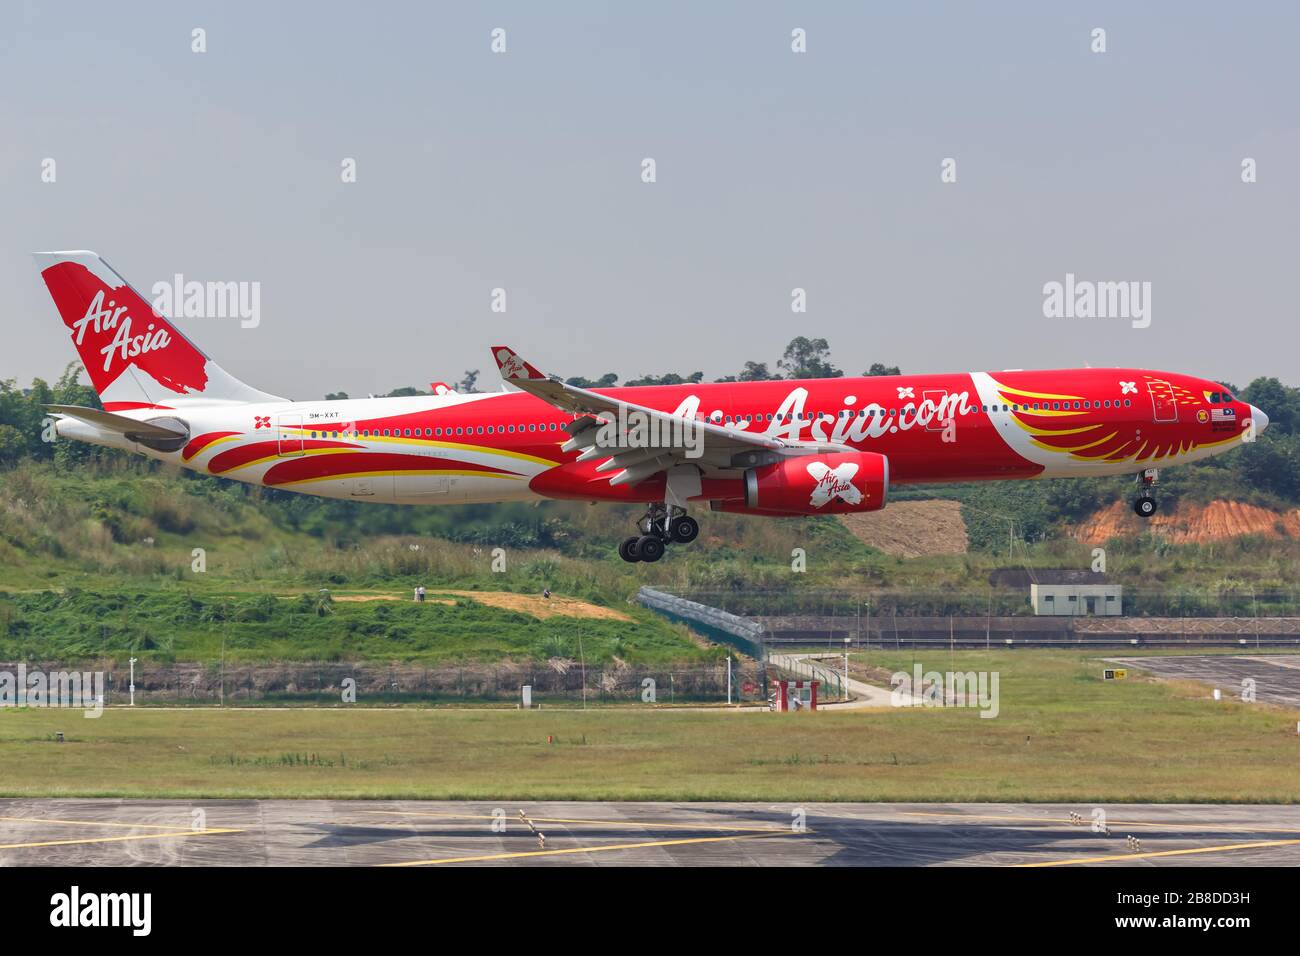 Chengdu, China – September 21, 2019: Air Asia X Airbus A330-300 airplane at Chengdu airport (CTU) in China. Airbus is a European aircraft manufacturer Stock Photo